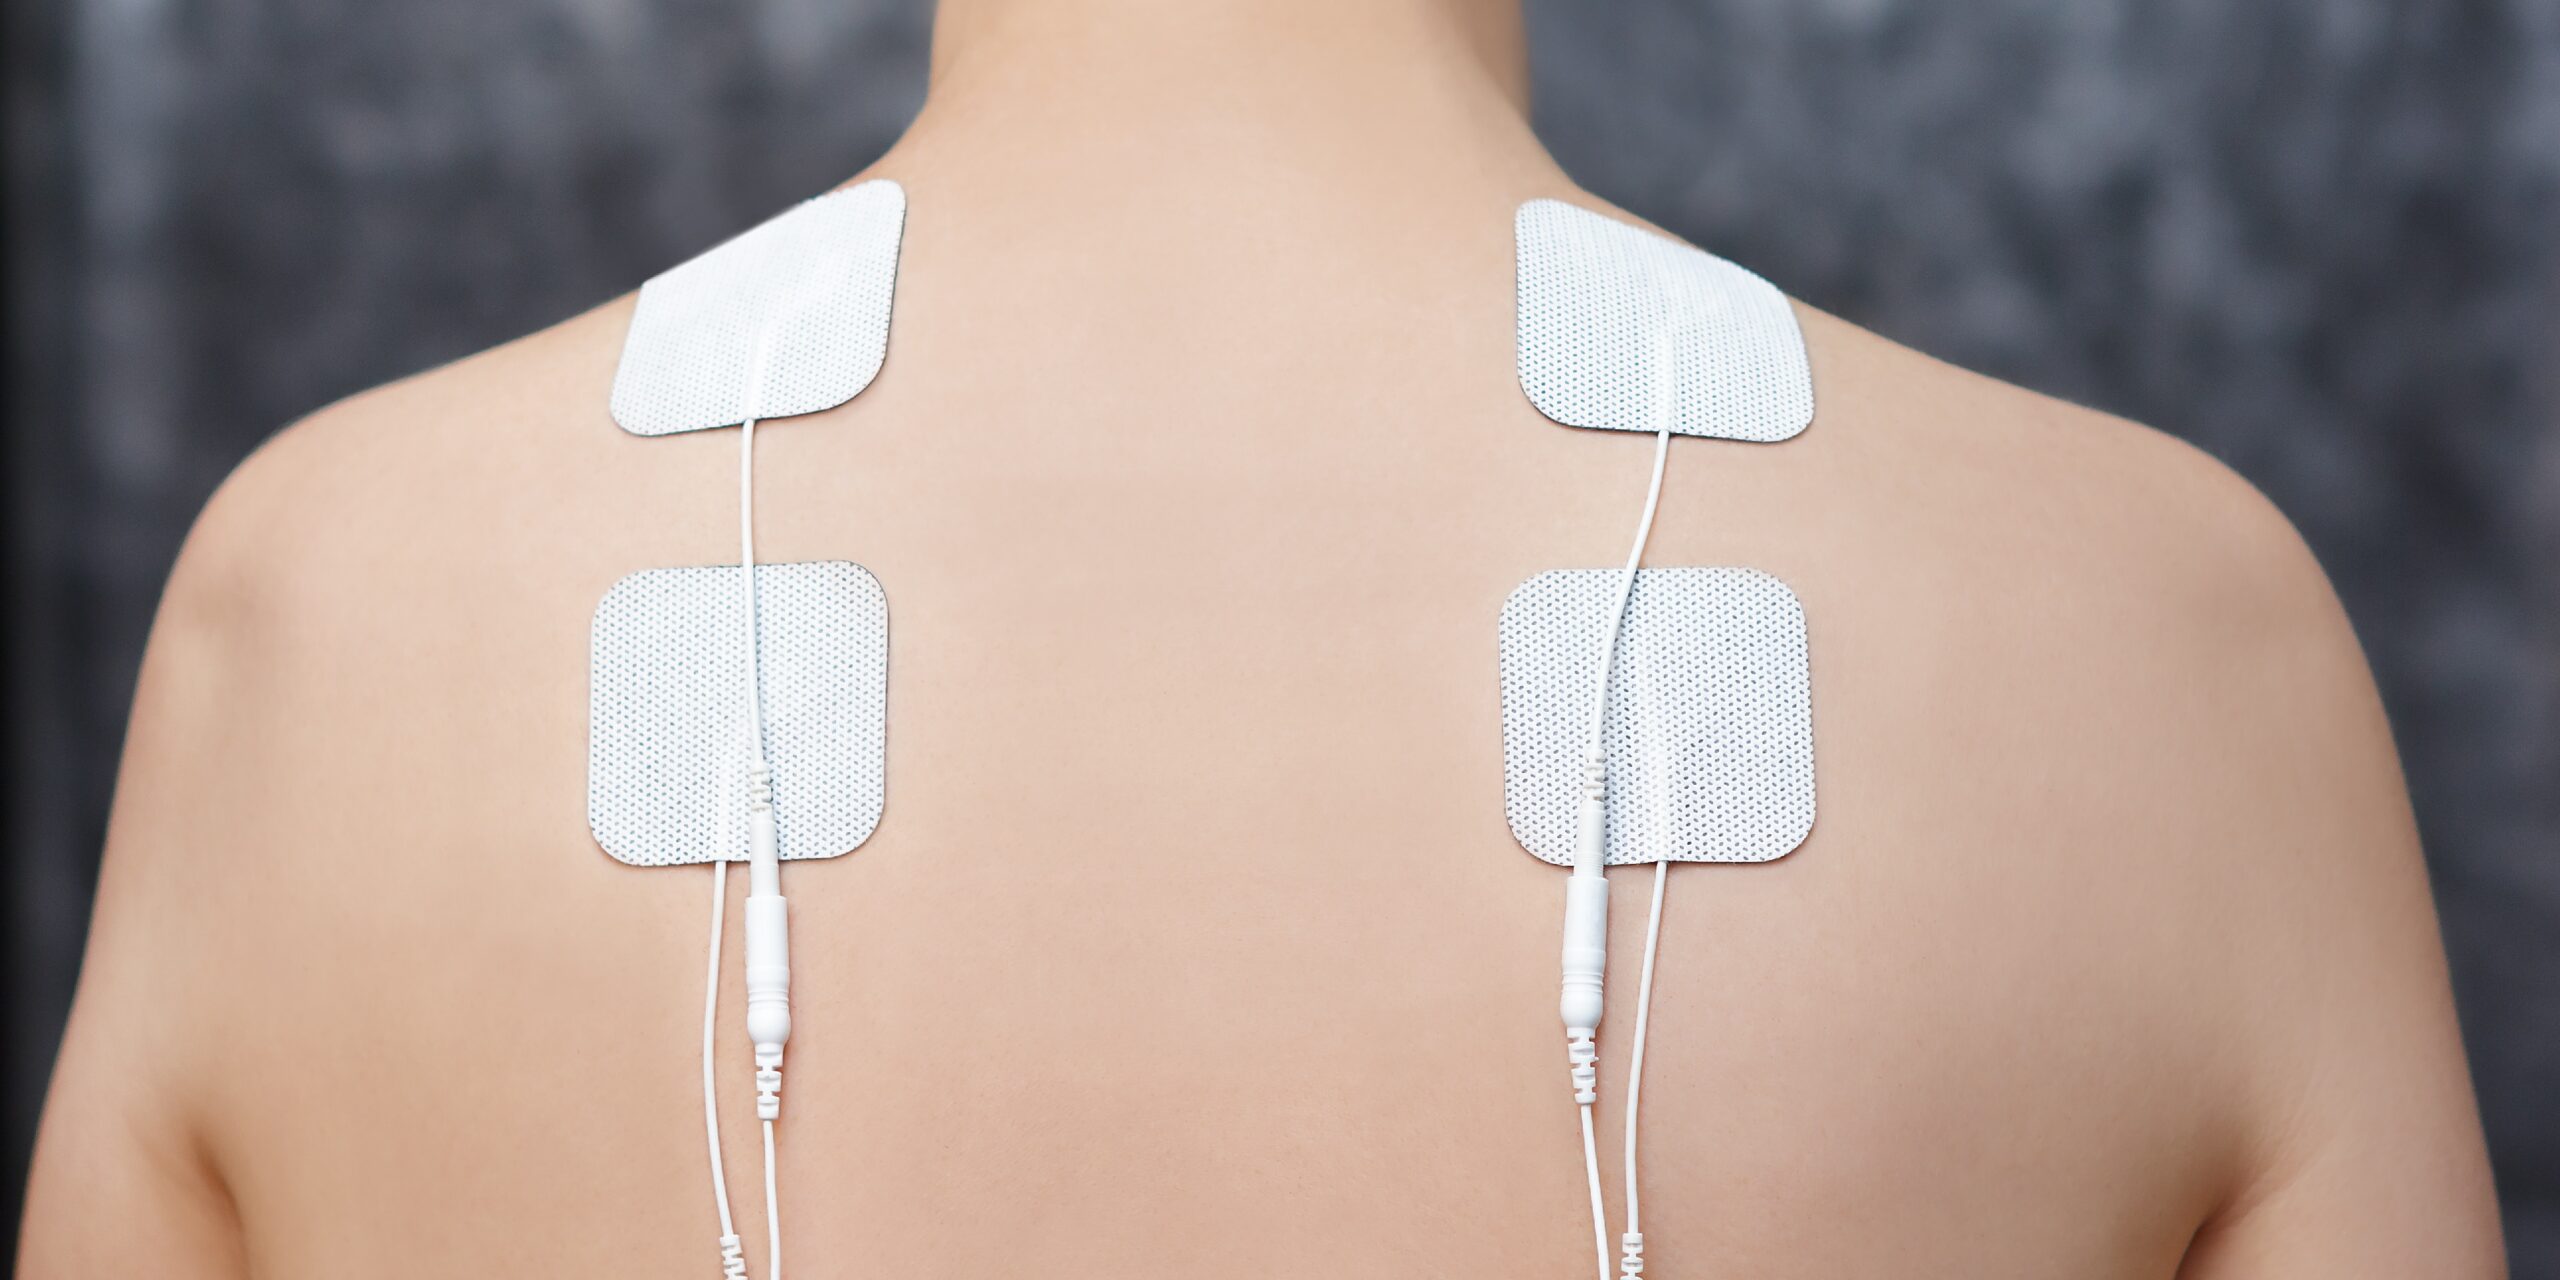 Acoustic and Electrical Pain Stimulation – A Healing Practice